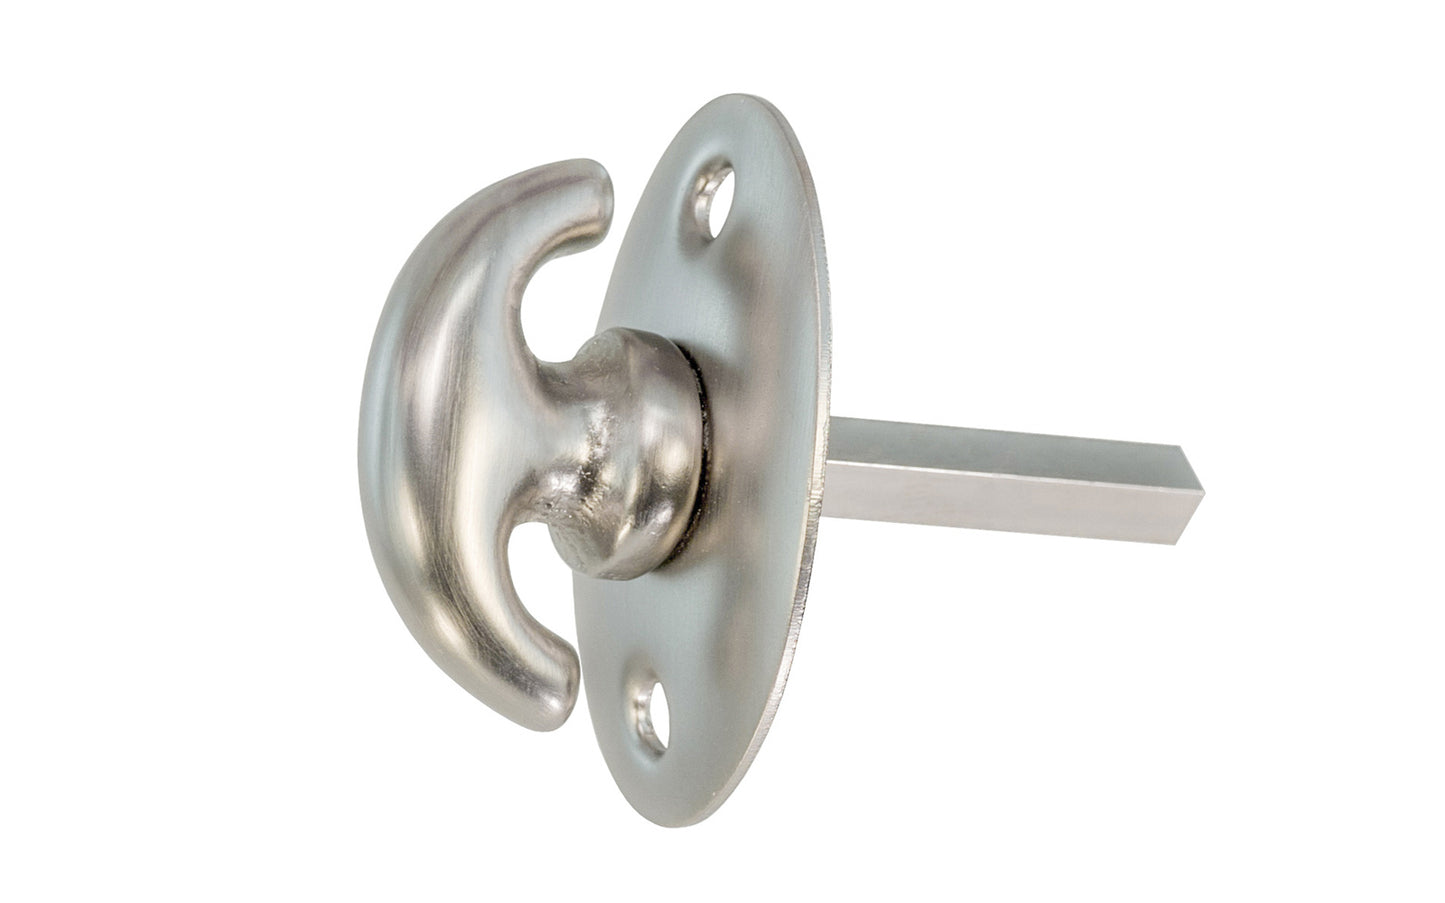 An old-style Classic Solid Brass crescent thumbturn for locking doors. Used with mortise locks, deadbolts, night-locks, catches. Made of solid brass material. 3/16" thick shaft. Brushed Nickel Finish